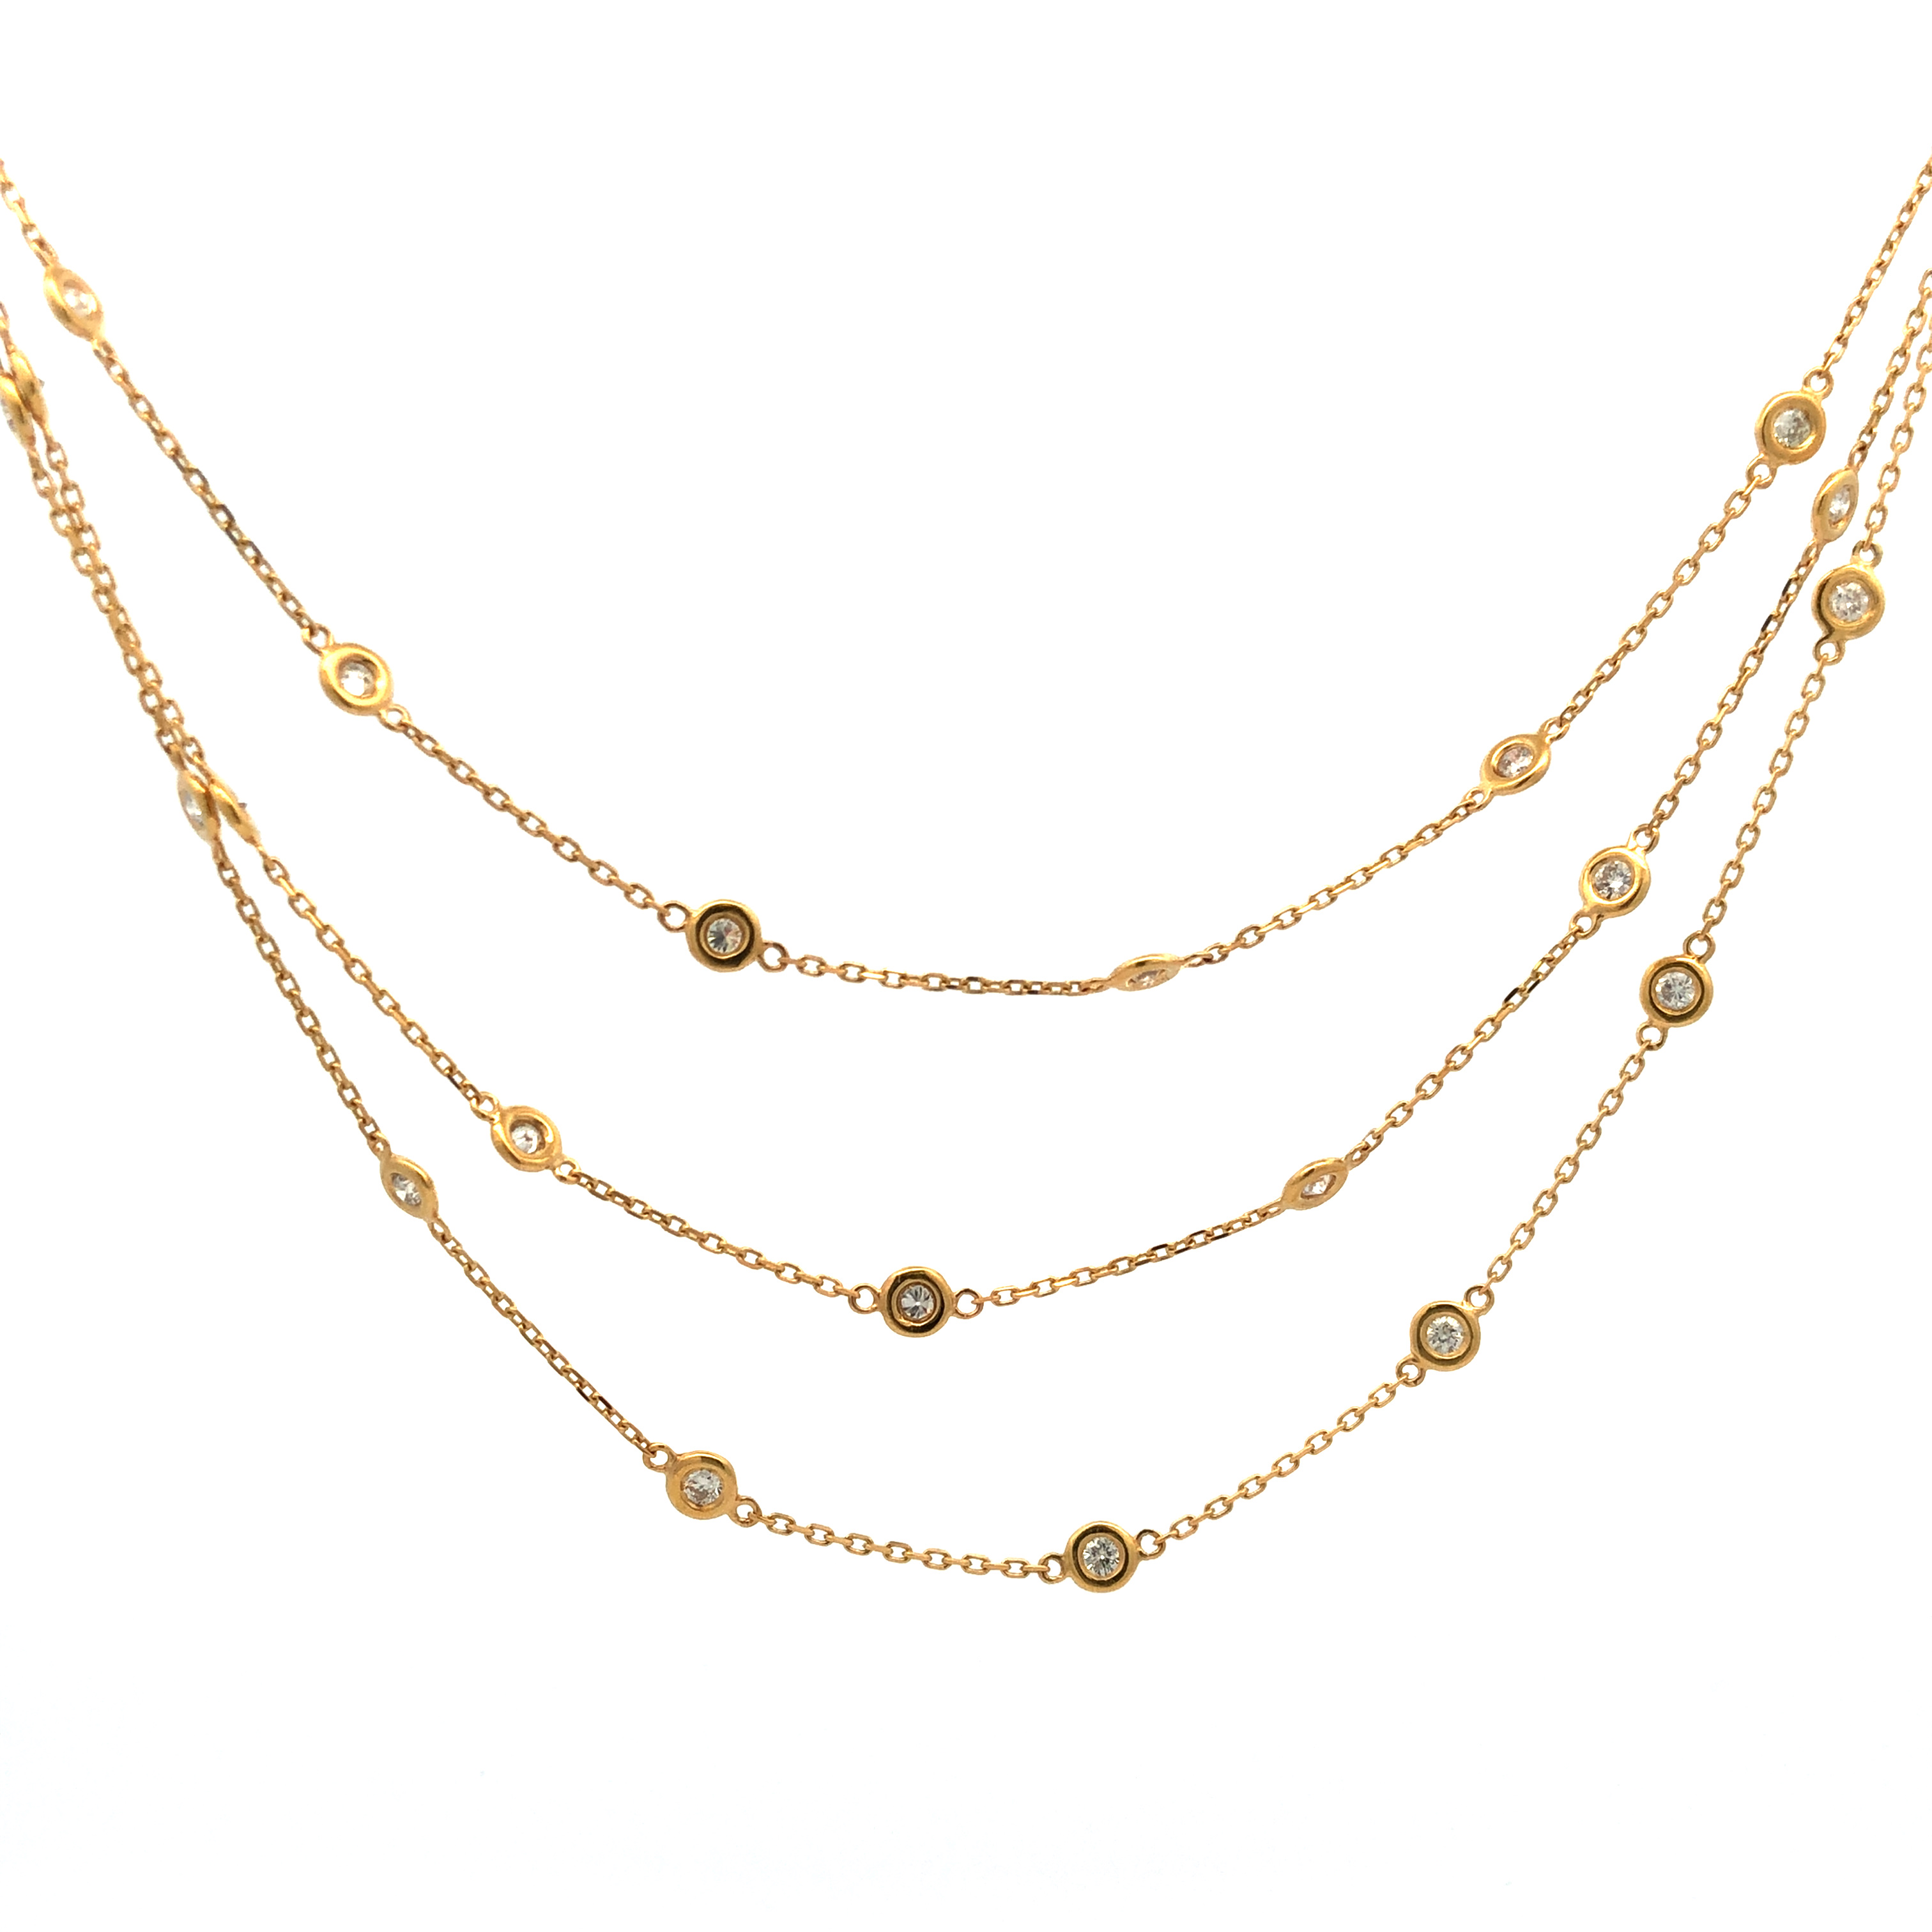 18K Yellow Gold Diamonds by the Yard Necklace 42